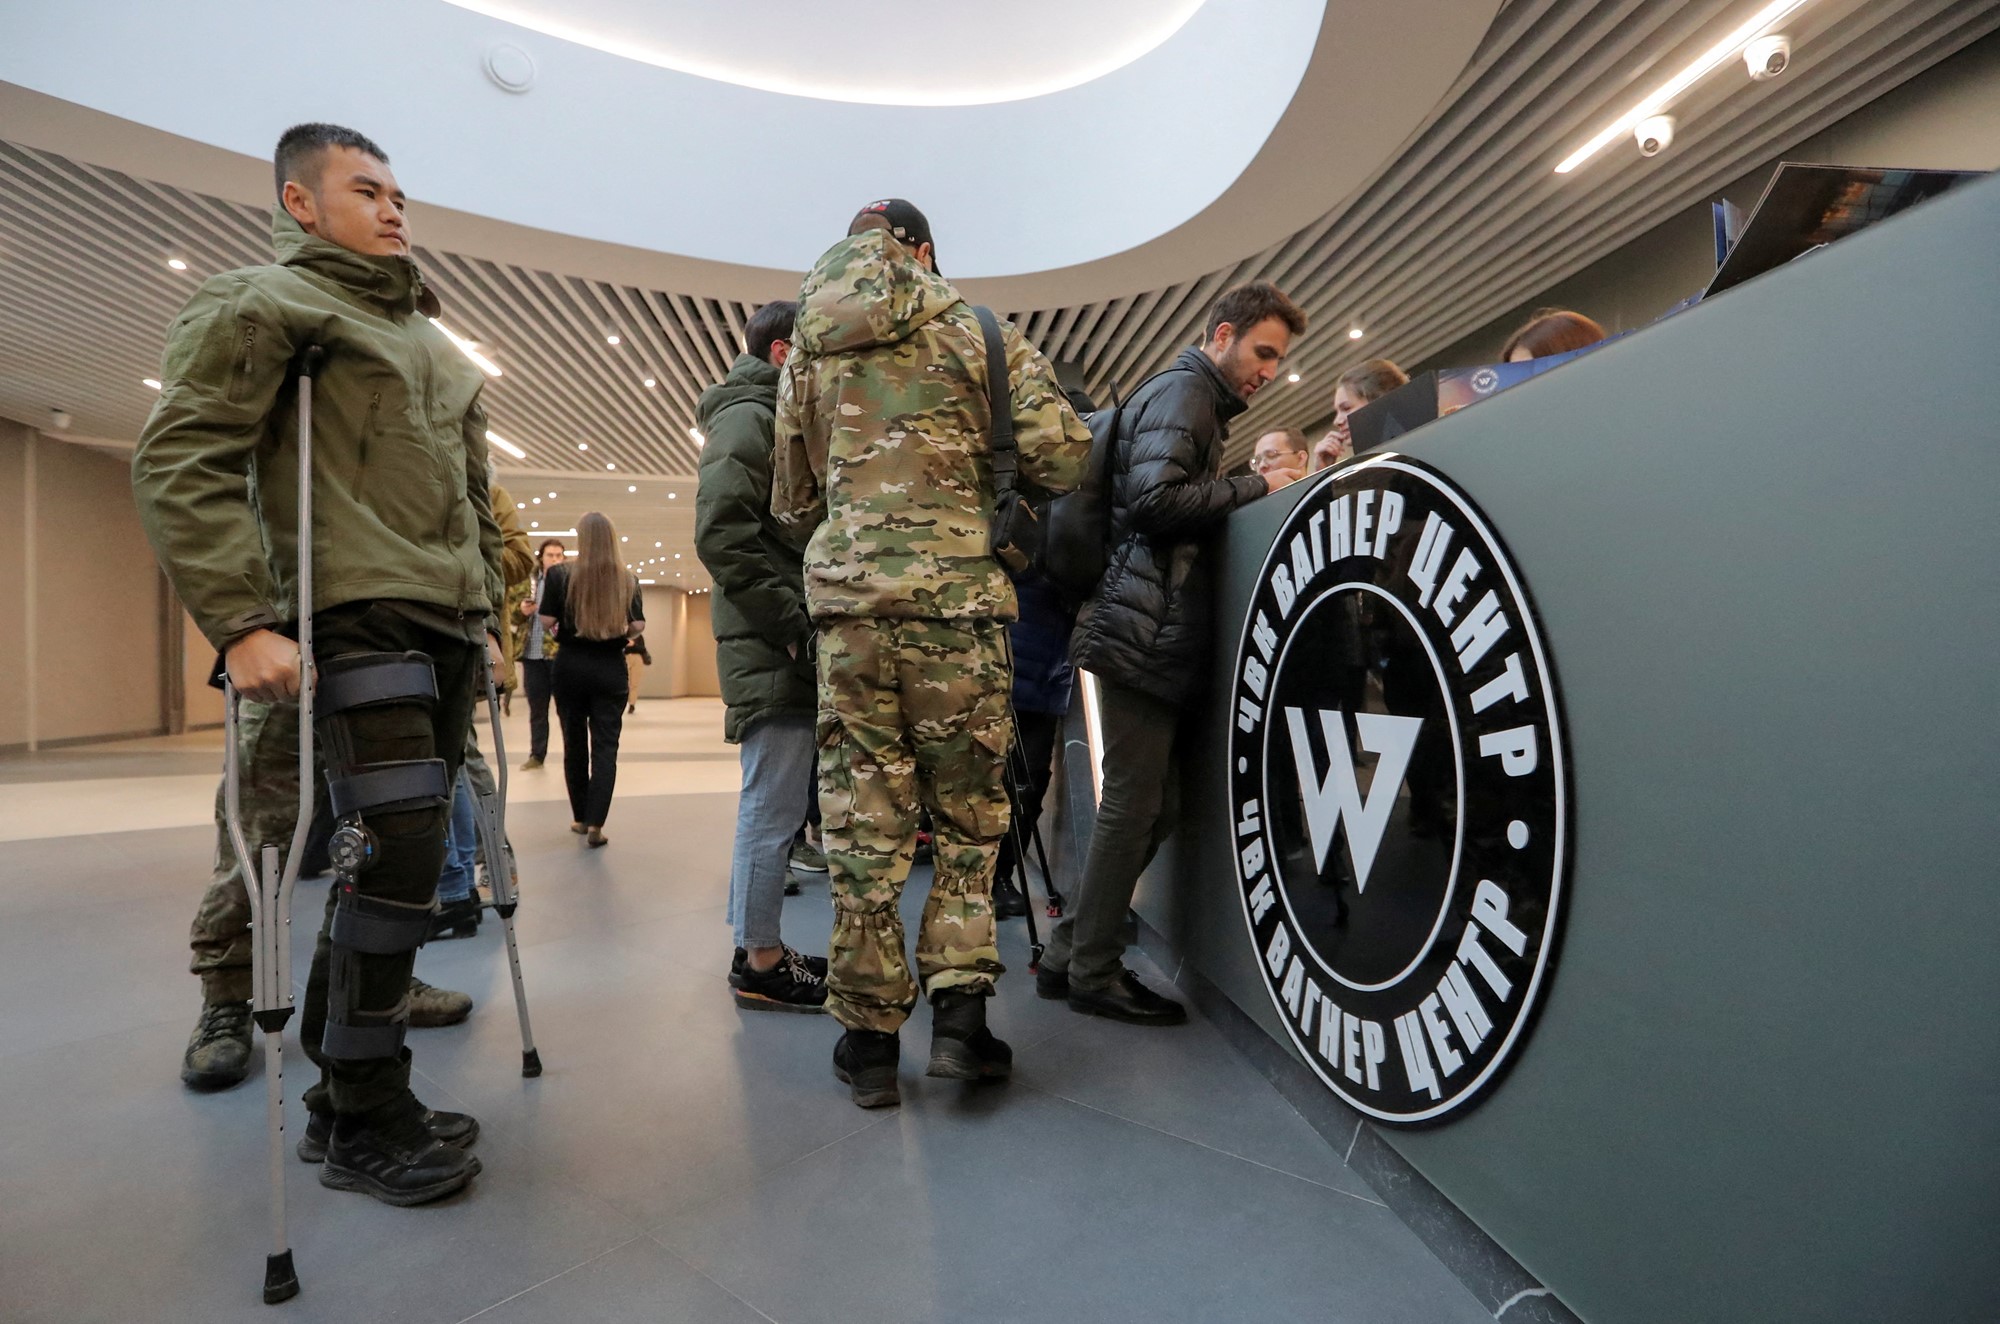 Men in camouflage and one on crutches stand at the front desk of a building with the Wagner logo